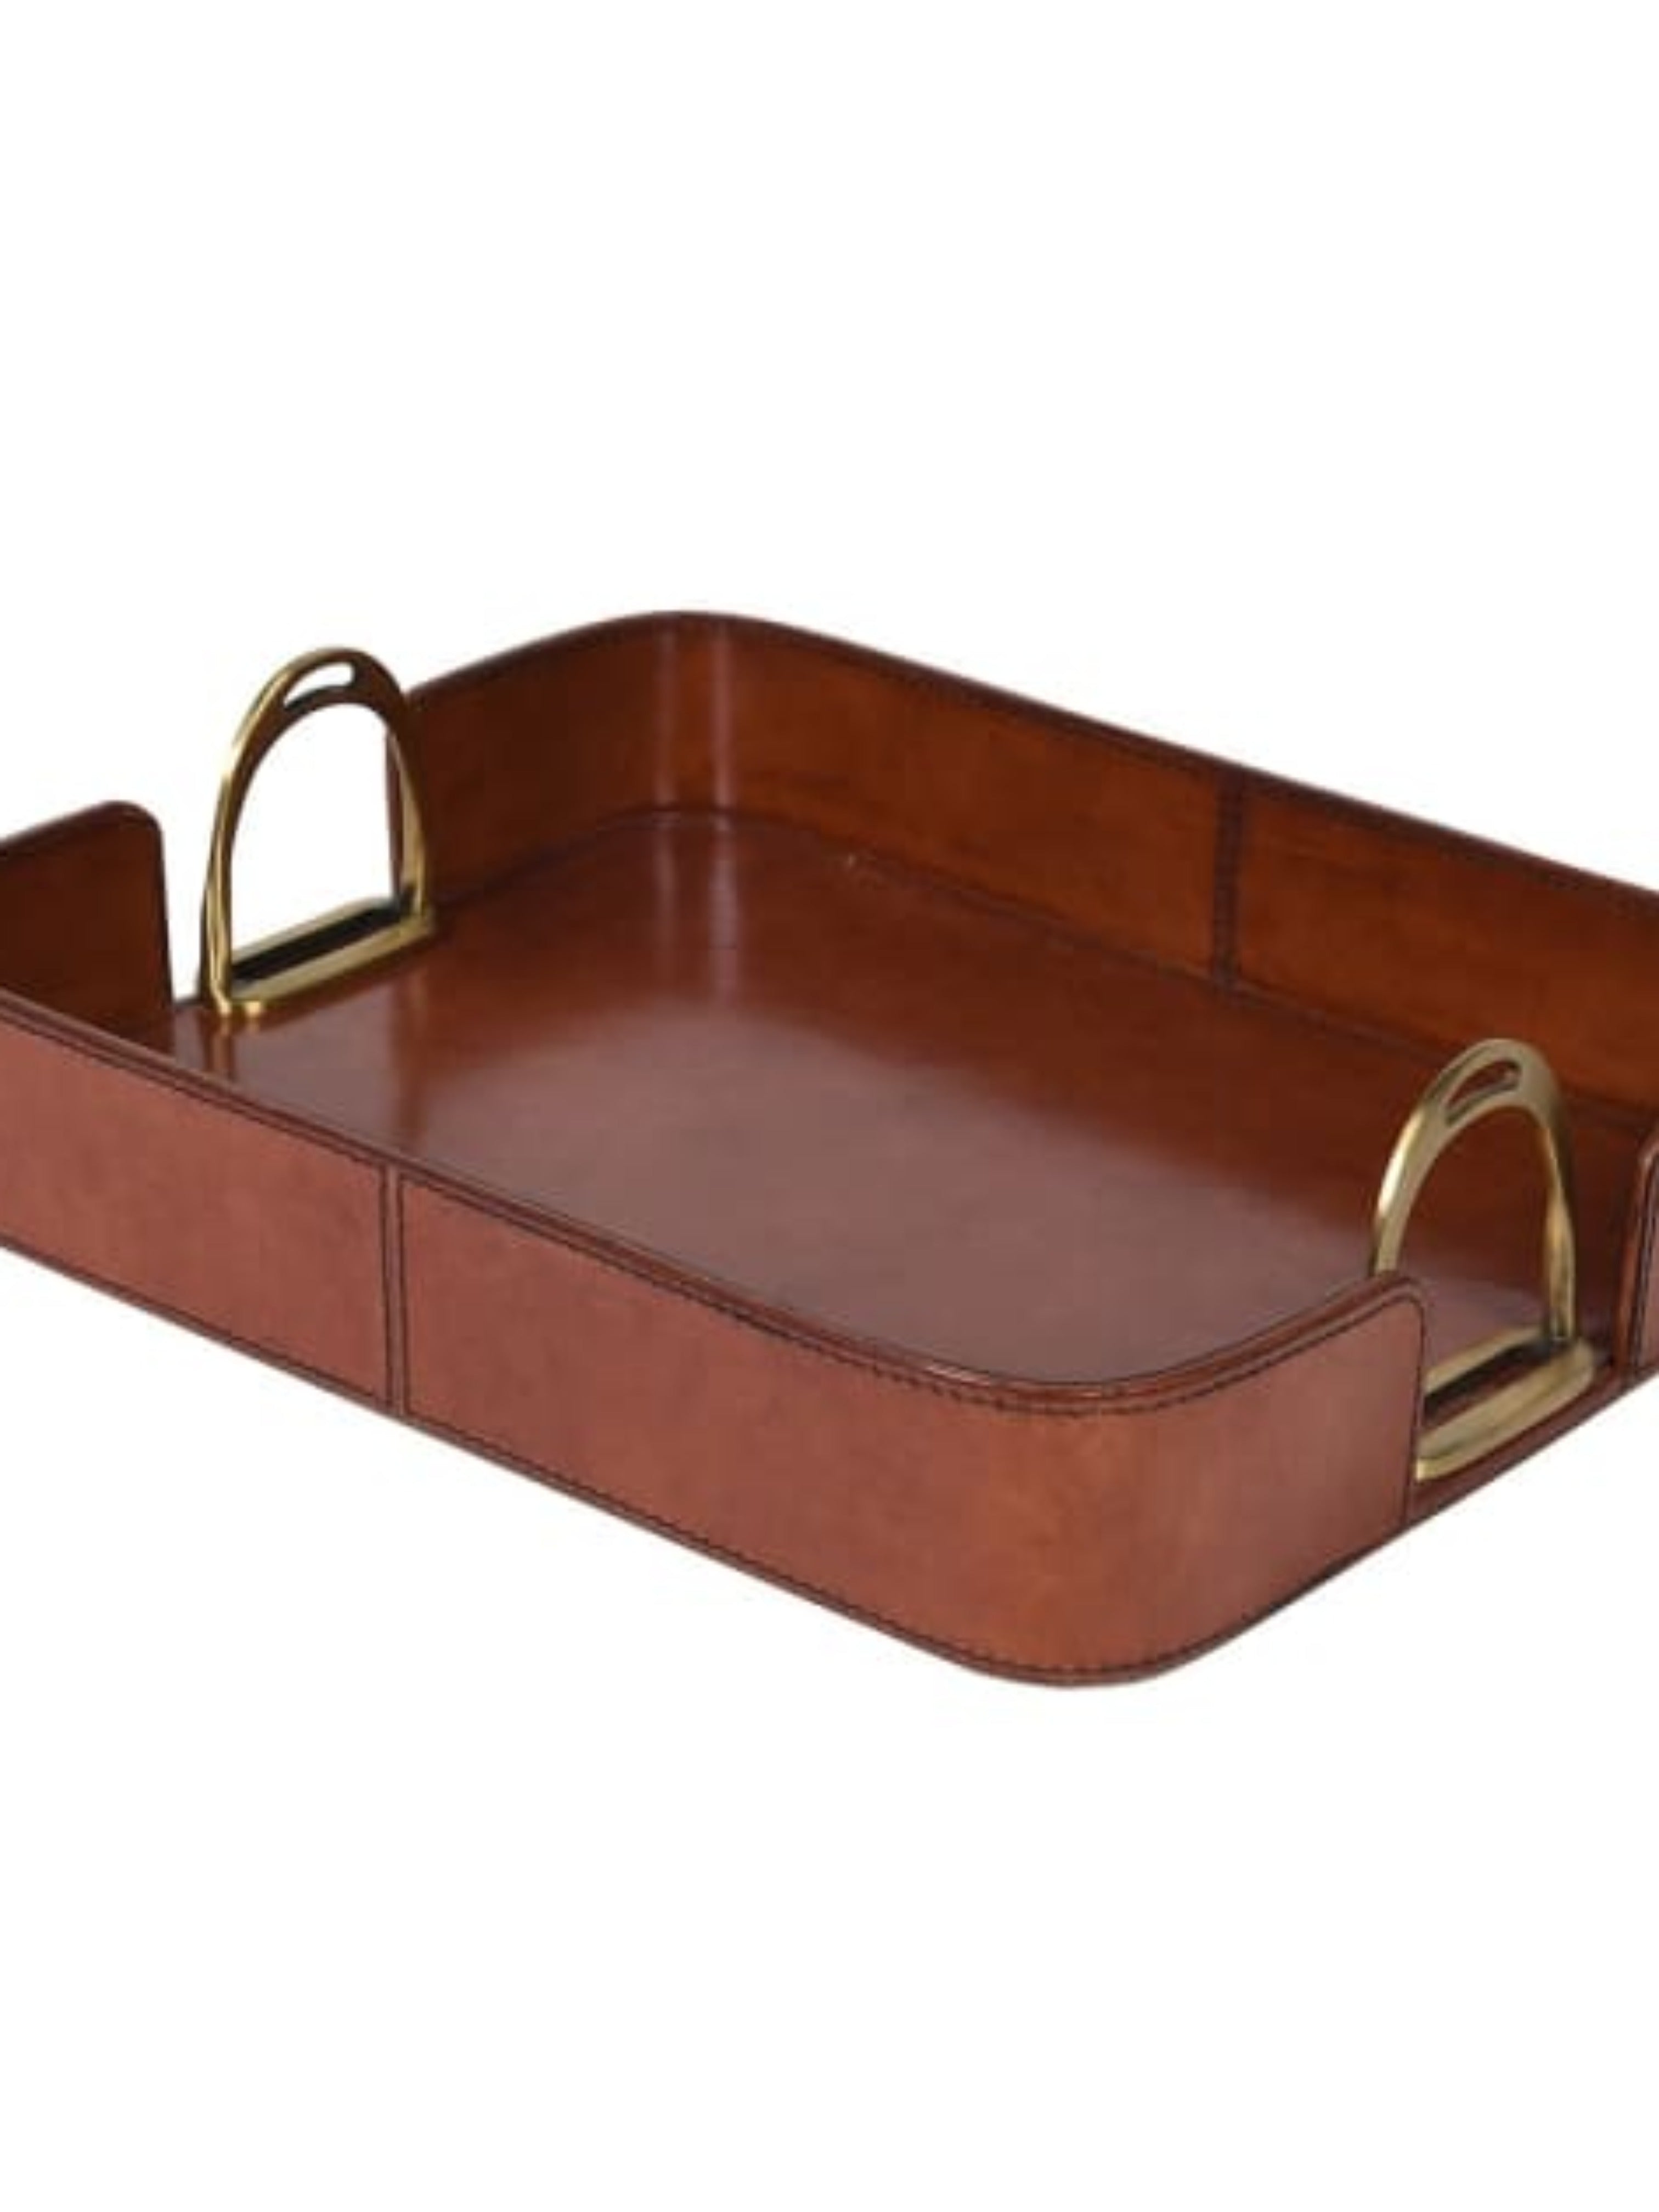 Rectangular Leather Tray with Stirrup Handles